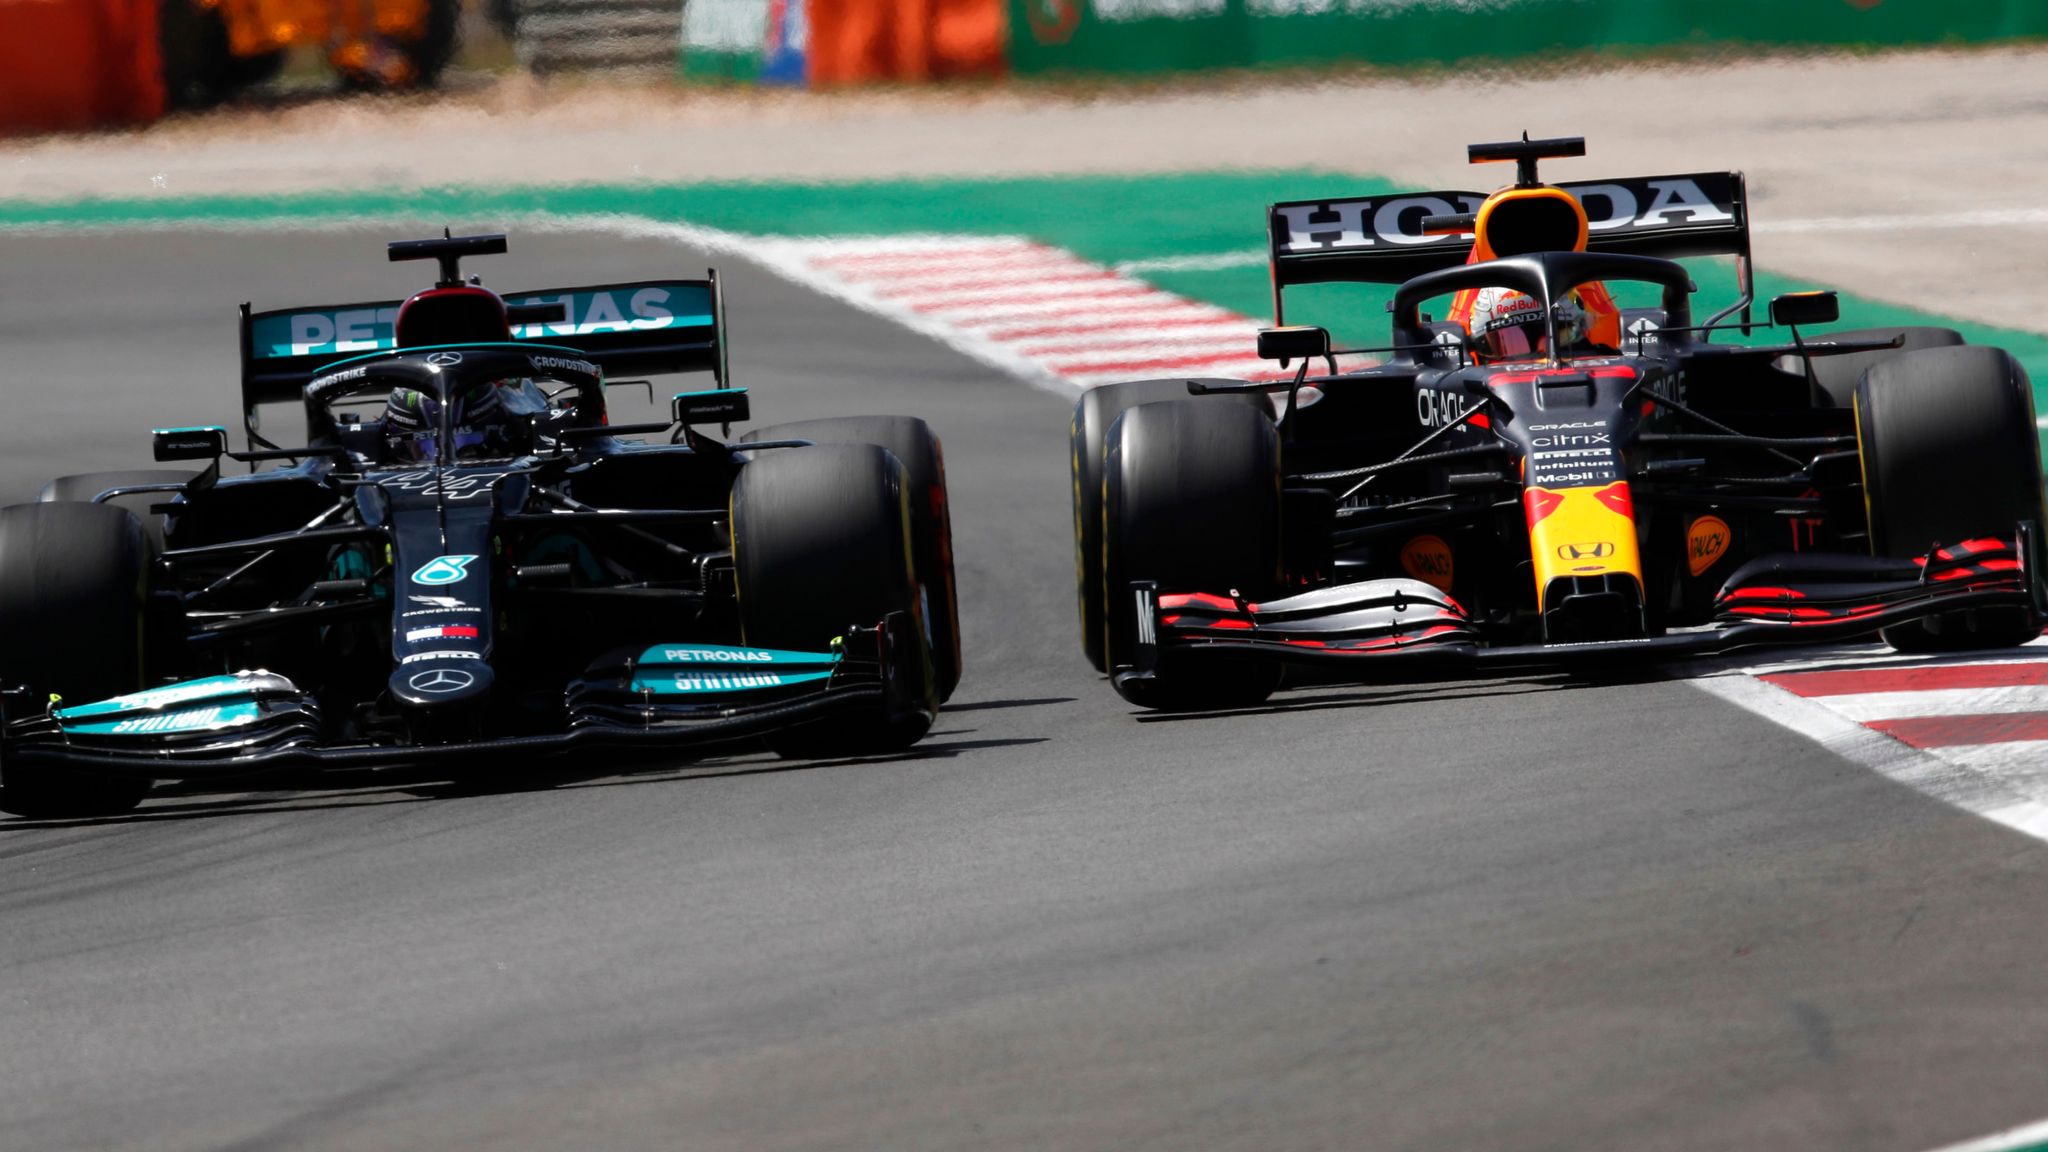 Martin Brundle The Verdict On Lewis Hamilton S Portuguese Gp Win And Red Bull S Track Limits Claim F1 News